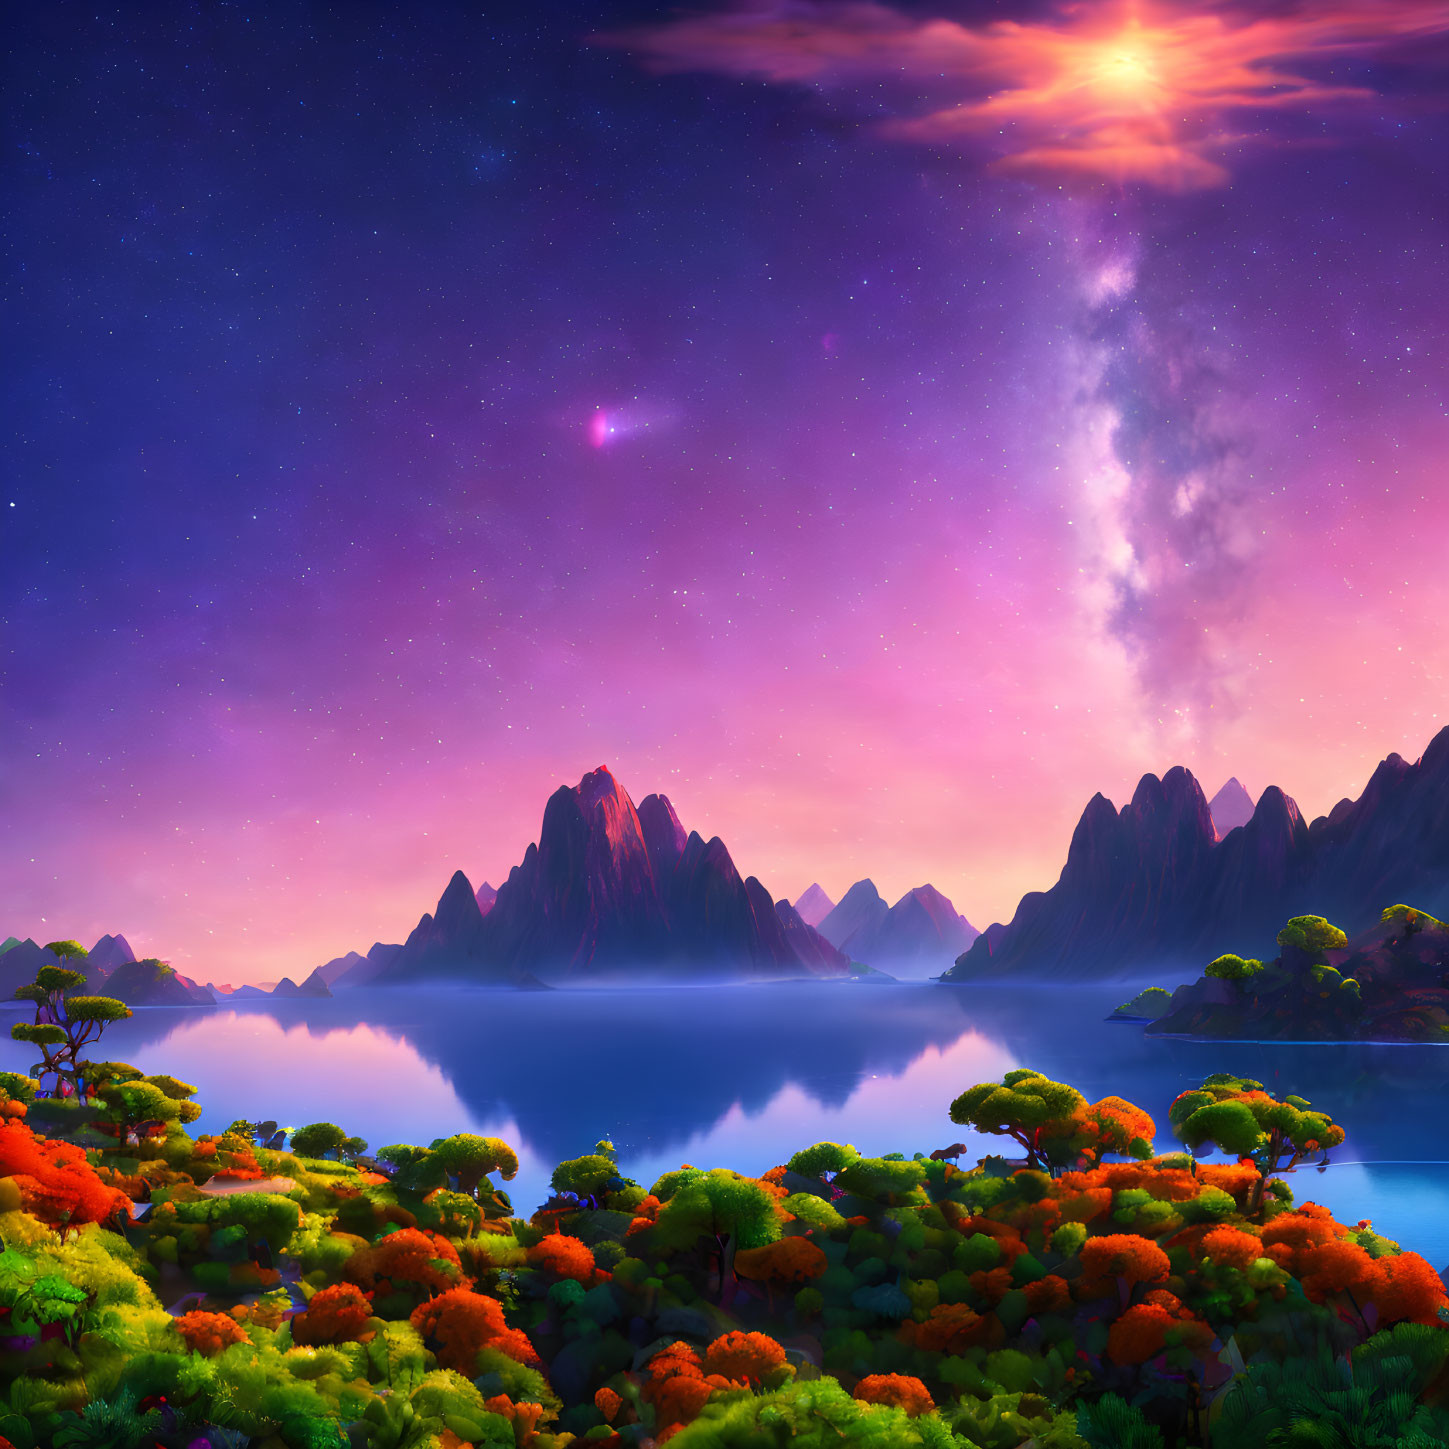 Serene lake, colorful flora, majestic mountains under starry sky